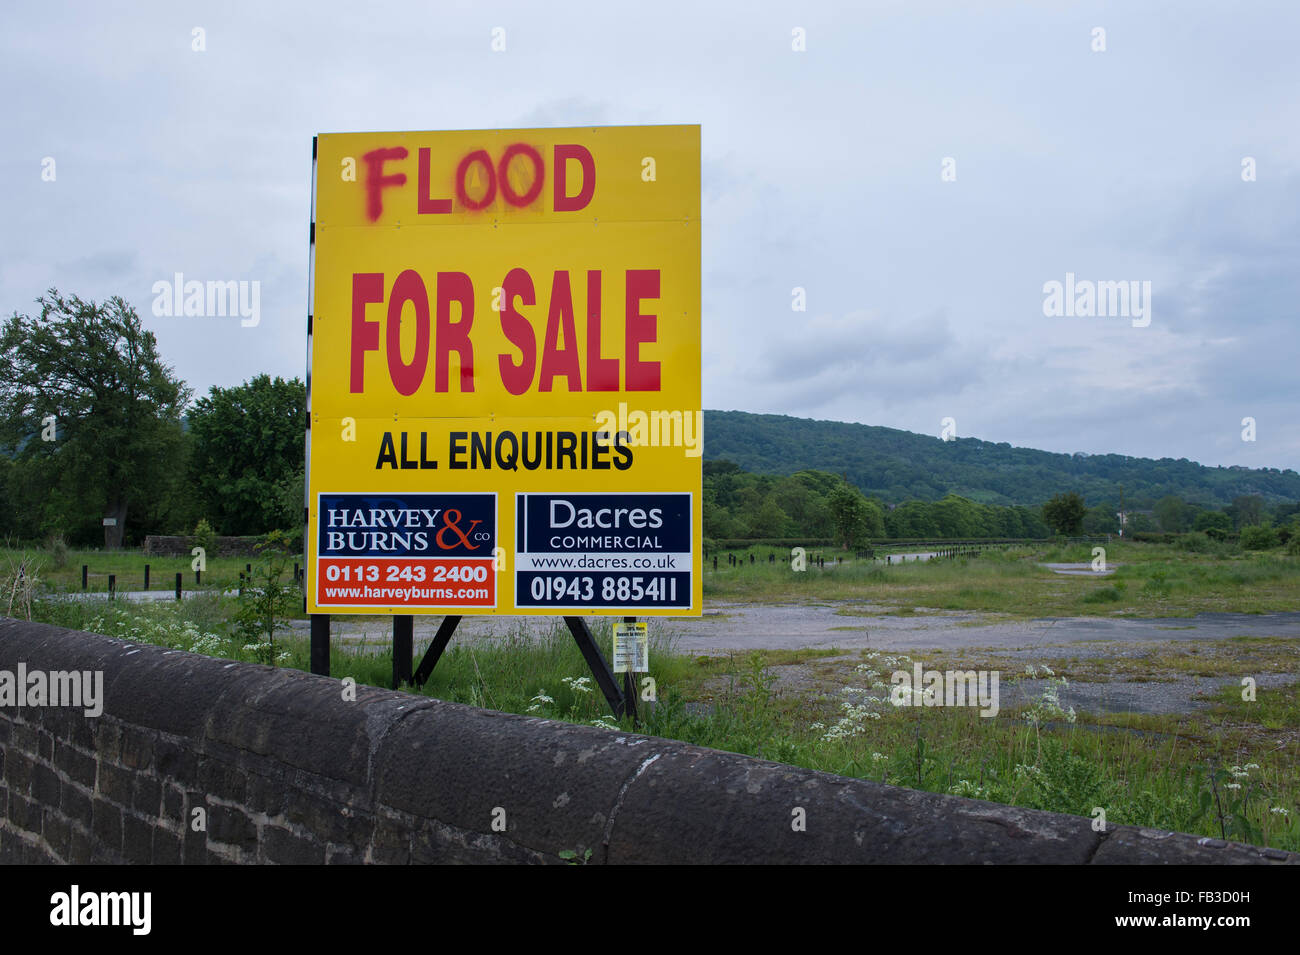 Irony, sarcasm, humour. Large sign advertising sale of land on floodplain - defaced and the word 'land' changed to 'flood.' Otley, England, GB, UK. Stock Photo